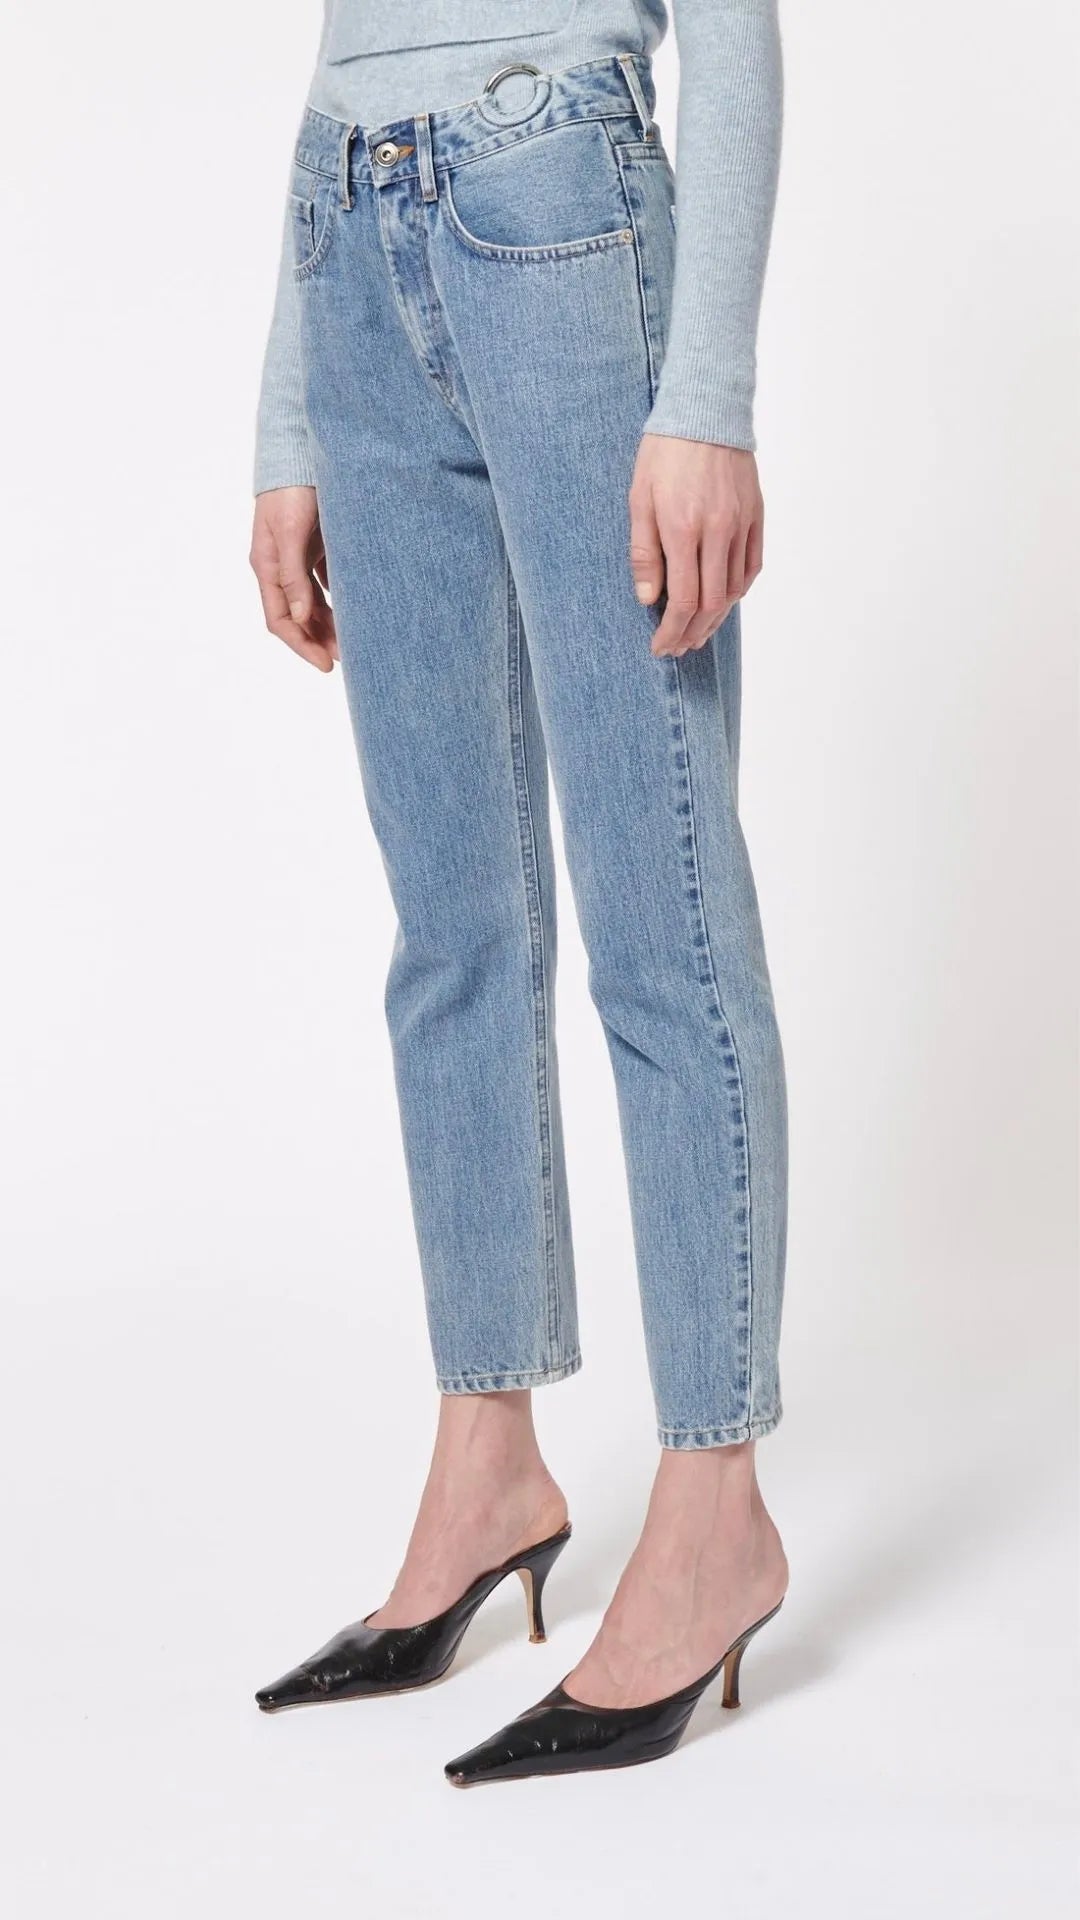 Boyarovskaya Slim Ring Jean. Light color stone denim with a slightly tapered leg and falls to just above the ankle. Zipper closure with silver ring detail on the front right. Product shown on model facing side.